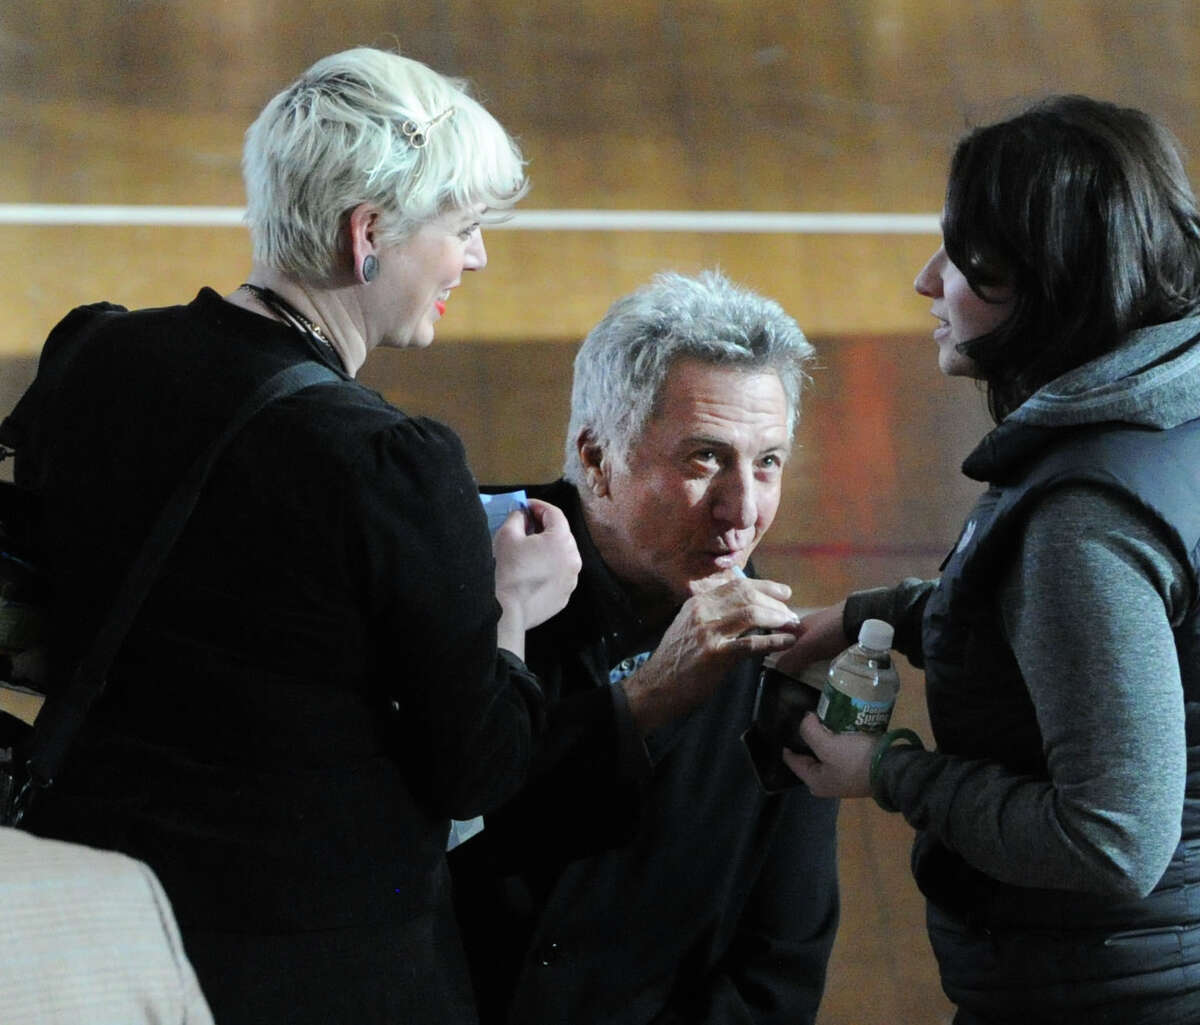 Actor Dustin Hoffman, center, takes a drink of a beverage on the set of "Boychoir," that was filming at the Greenwich Civic Center in Old Greenwich, Conn.,Tuesday afternoon, March 11, 2014.